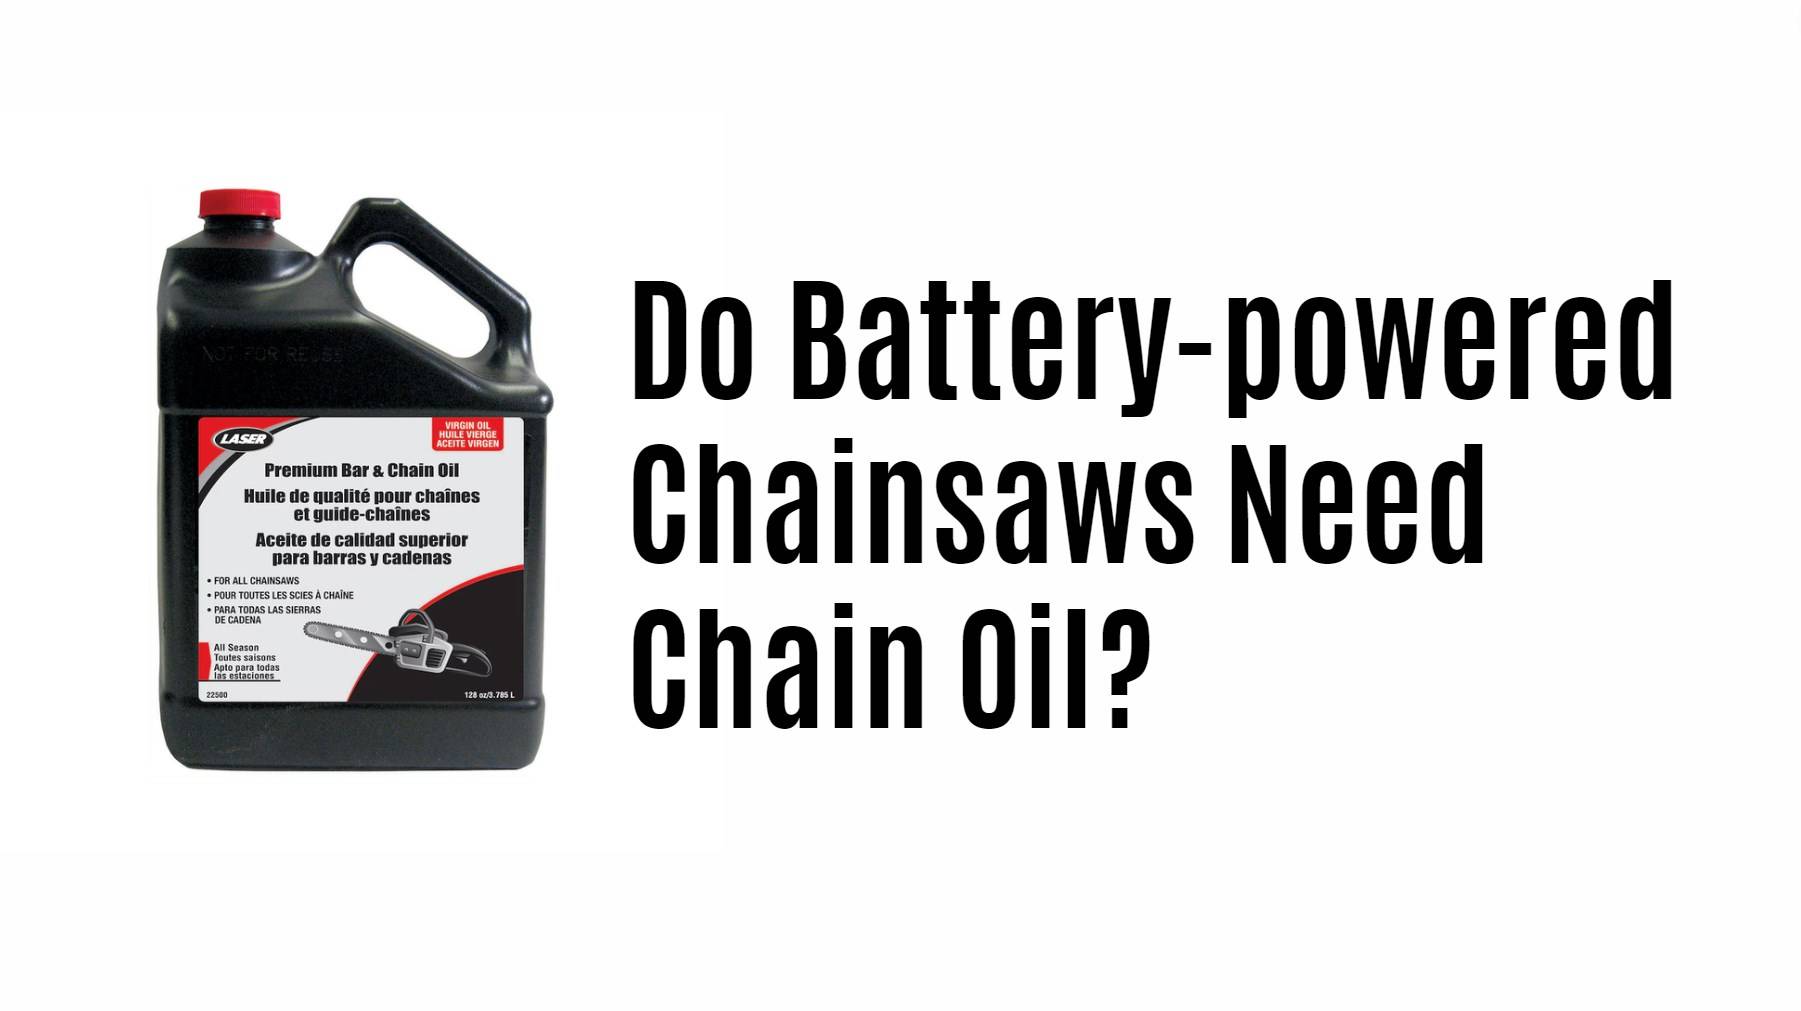 Do Battery-powered Chainsaws Need Chain Oil?